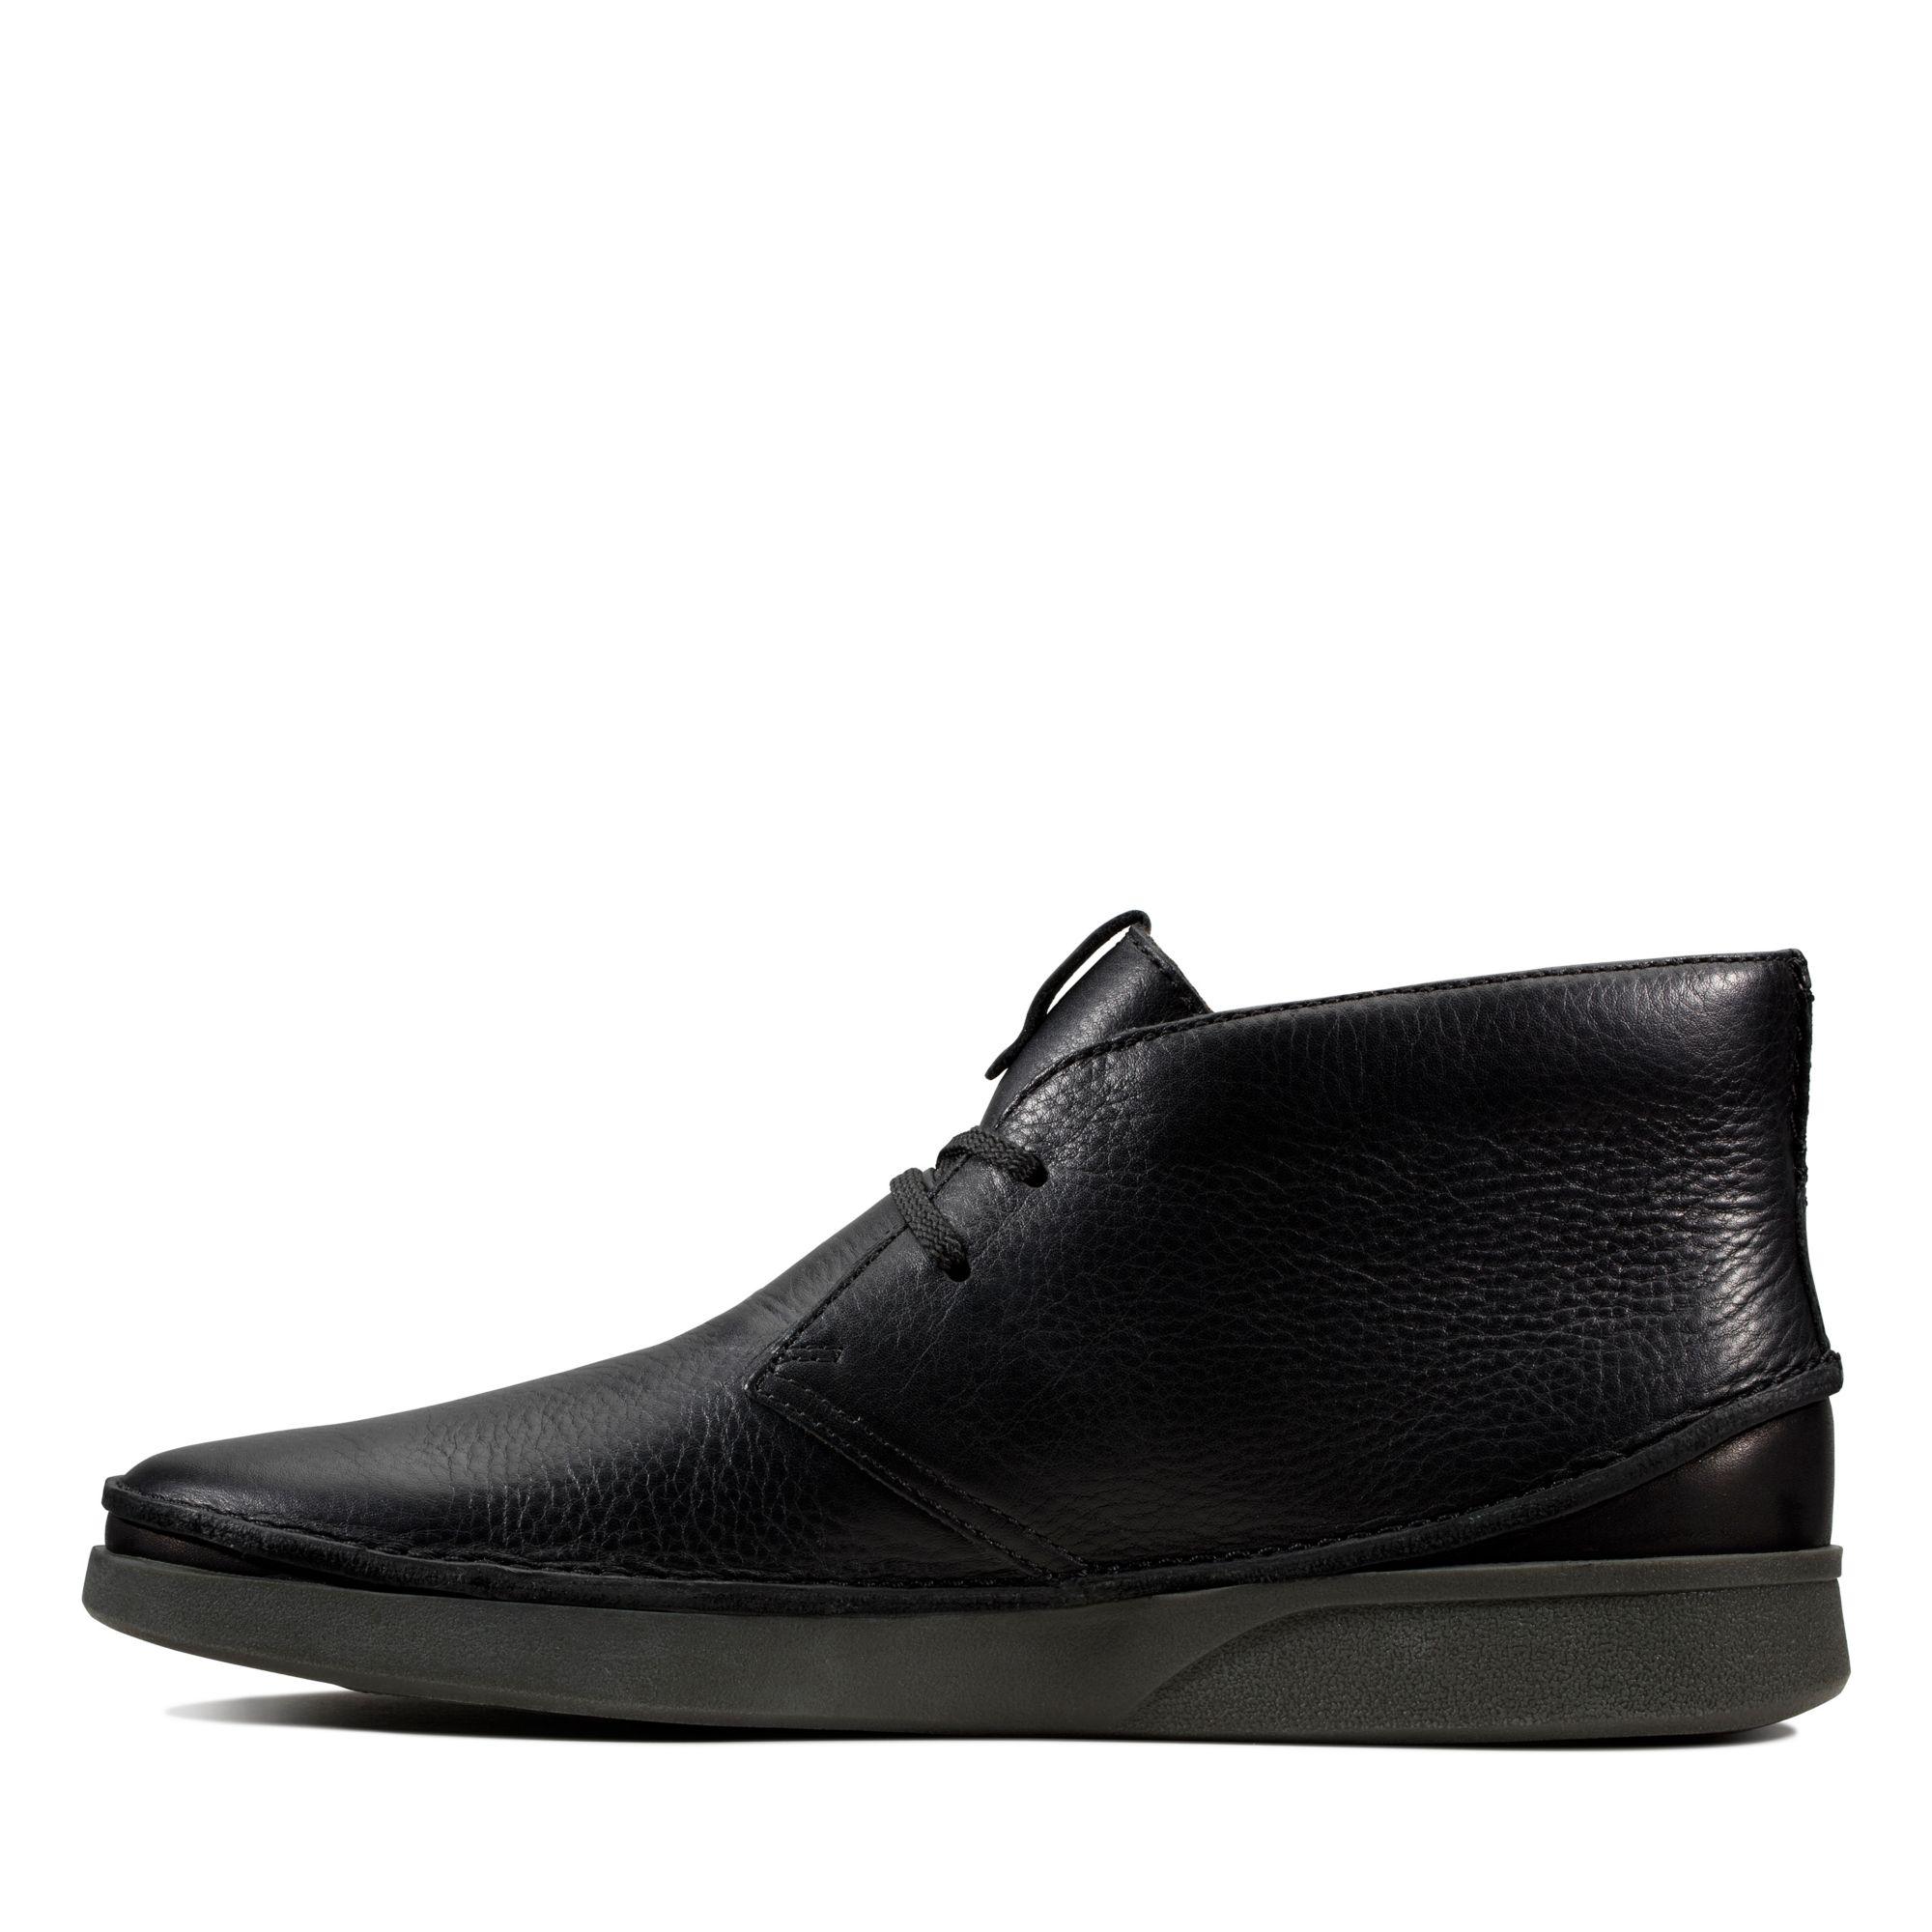 Clarks Leather Oakland Rise in Black Leather (Black) for Men - Lyst